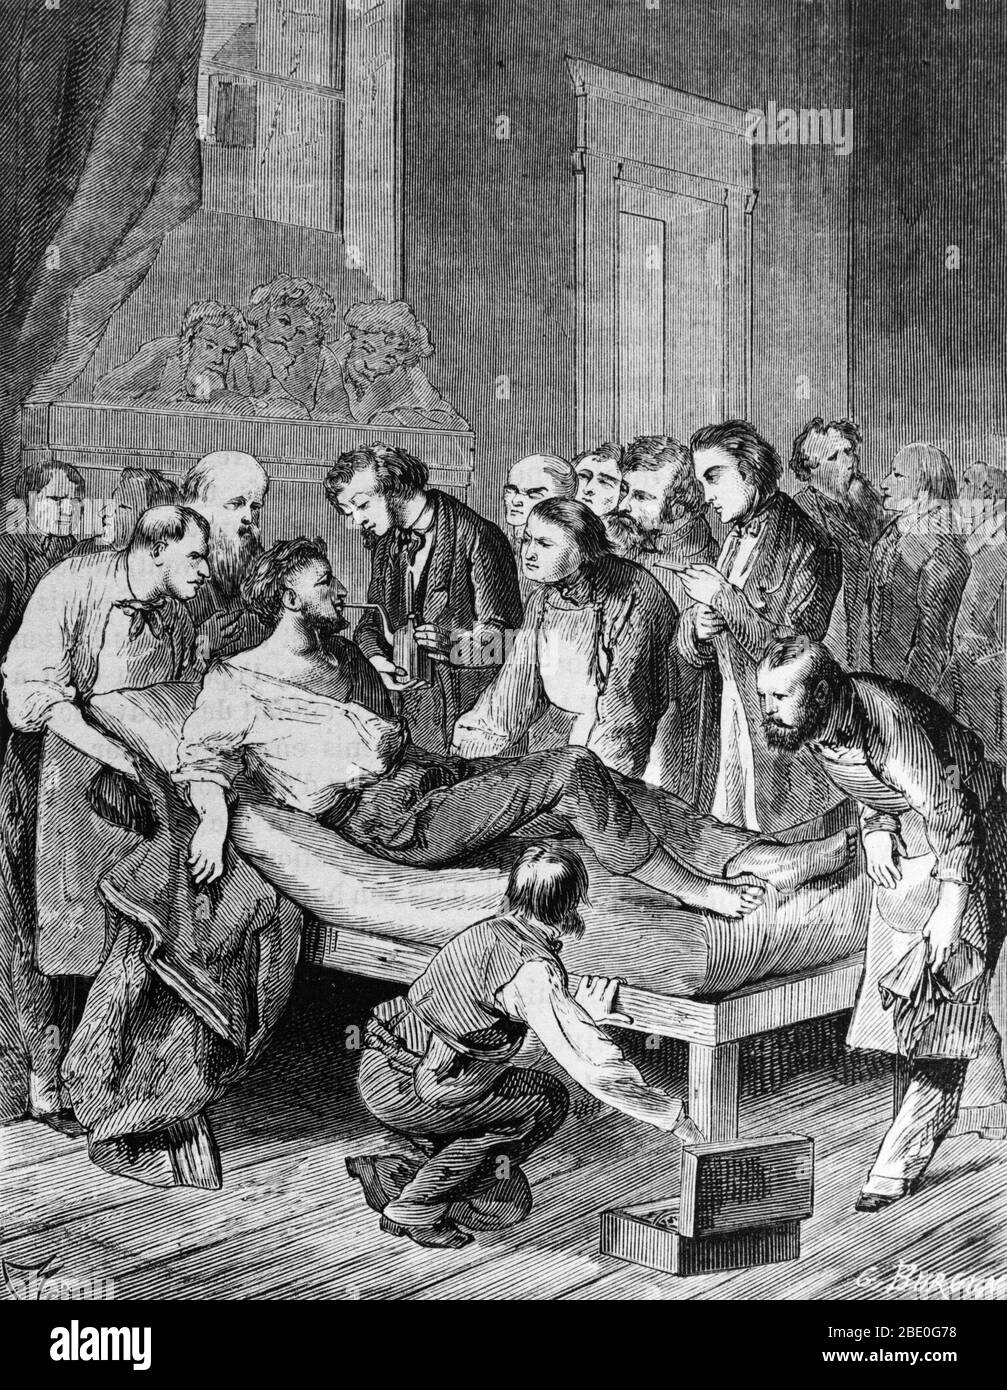 Engraving showing doctors administering sulphuric ether to a patient prior to removing a tumor from his neck in 1846, marking the first operation done under anesthesia. Stock Photo